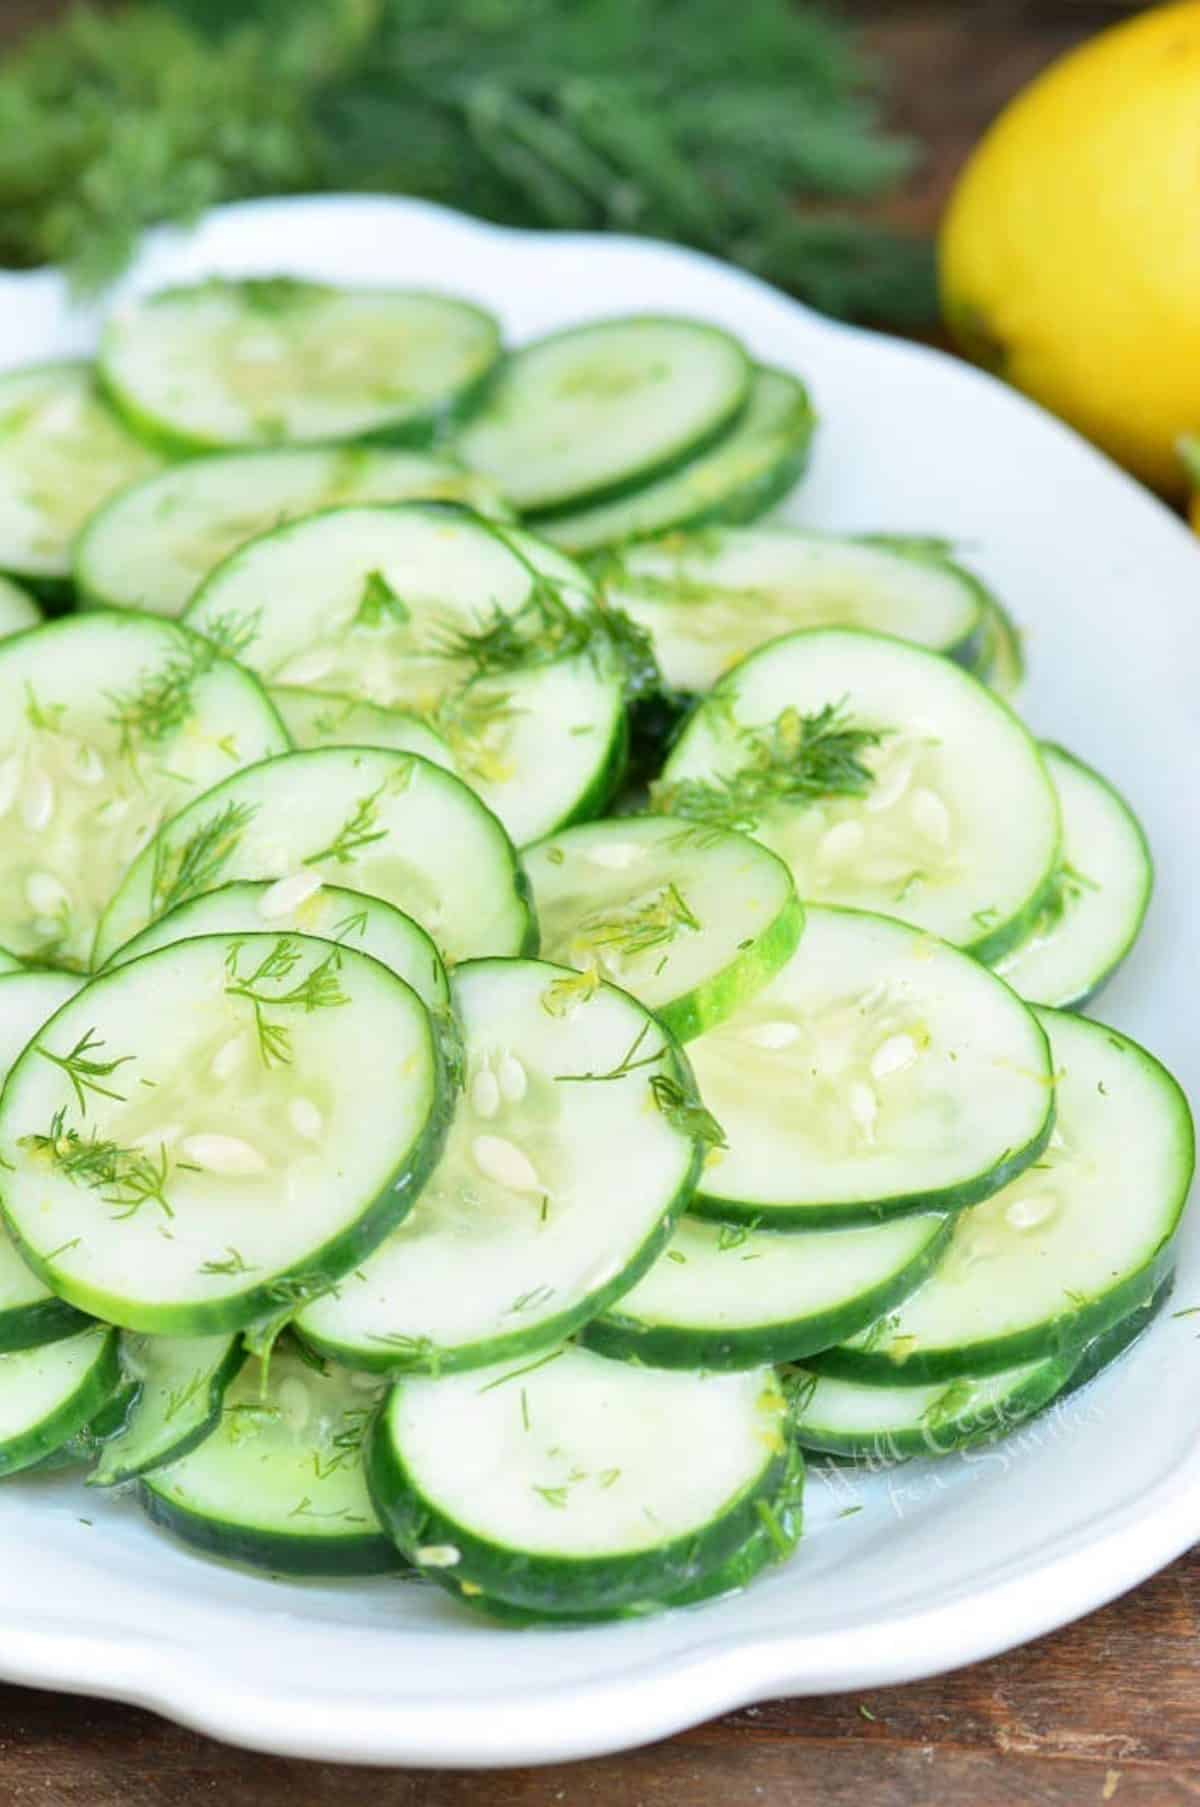 simple cucumber salad in a plate nest to dill and lemons.